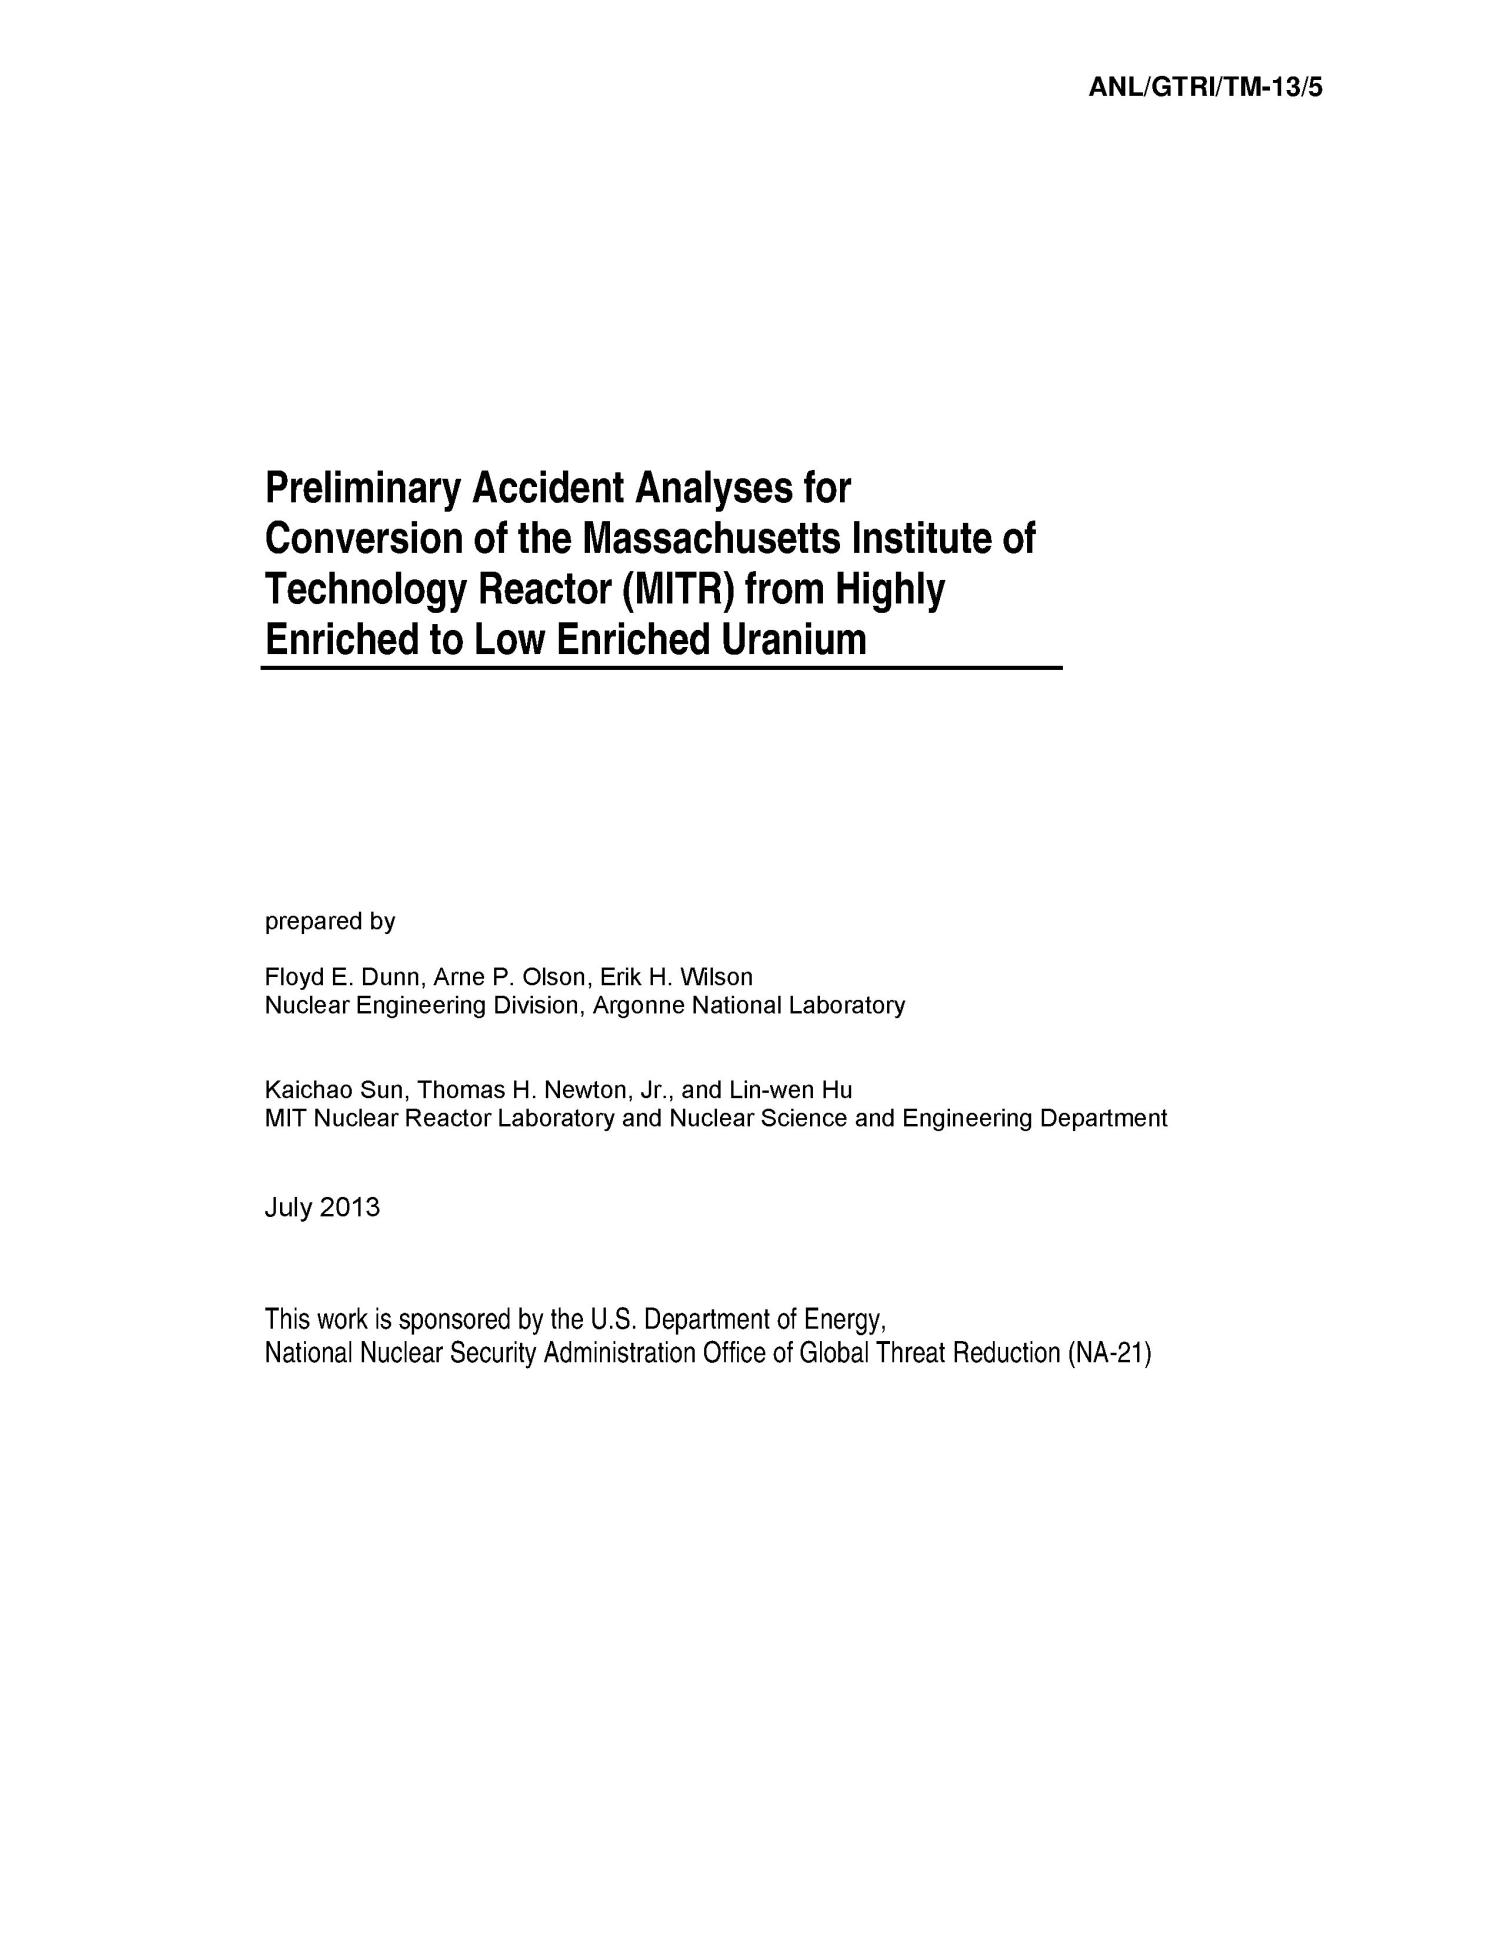 Preliminary Accident Analyses for Conversion of the Massachusetts Institute of Technology Reactor (MITR) from Highly Enriched to Low Enriched Uranium
                                                
                                                    [Sequence #]: 3 of 60
                                                